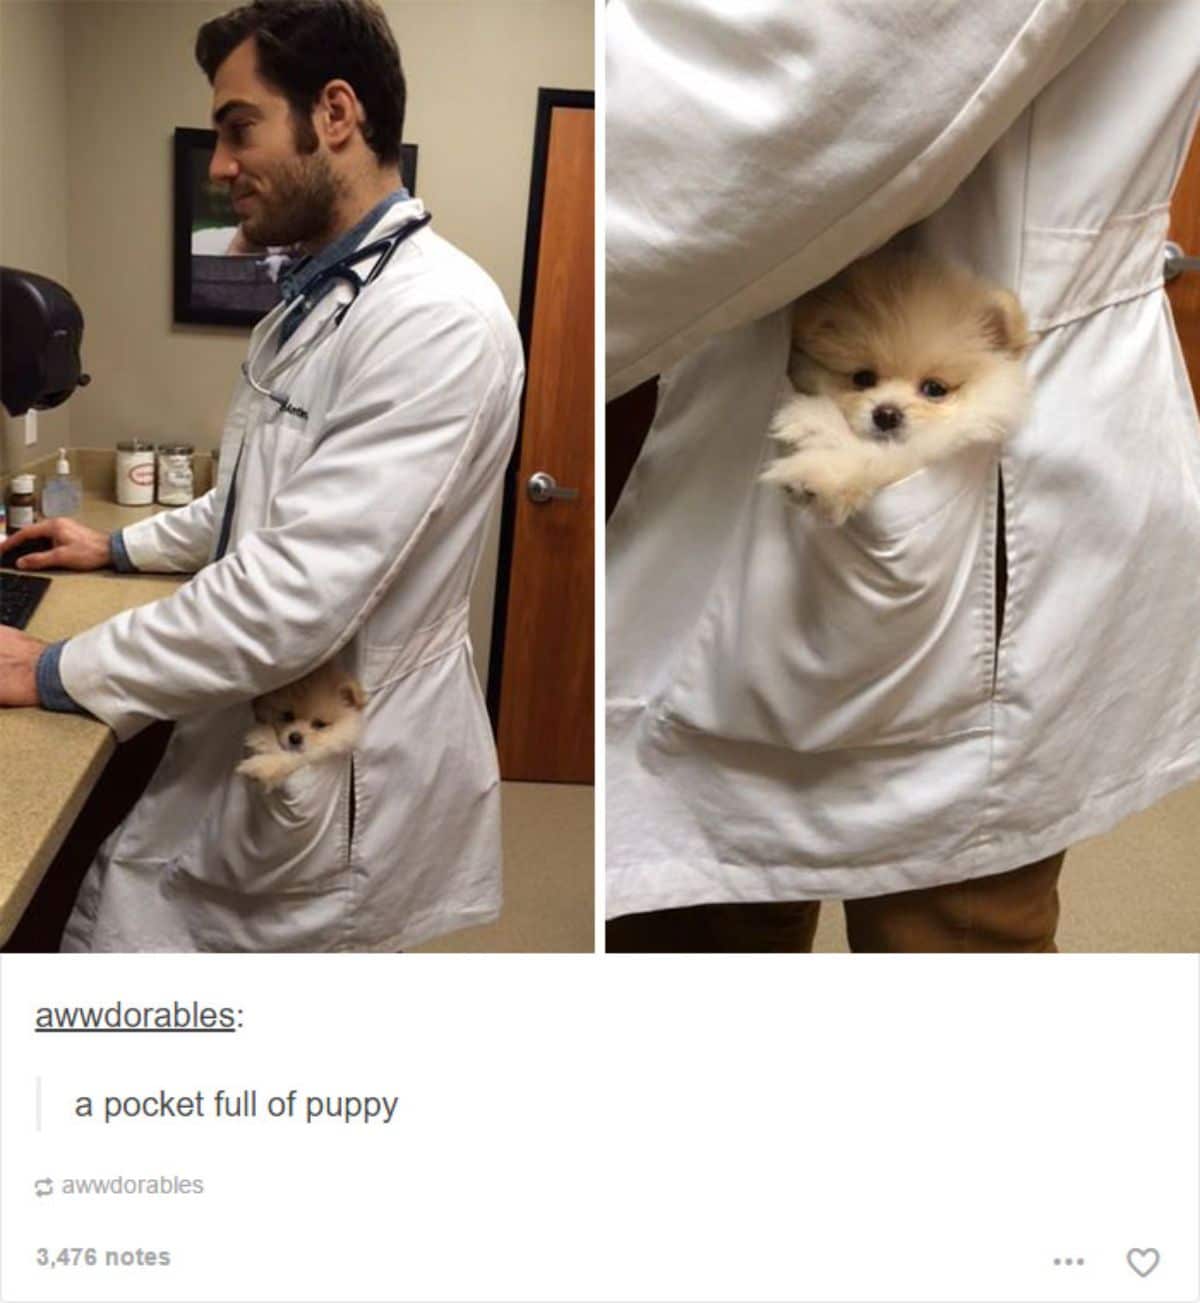 tumblr post of a doctor in a white coat with a brown pomeranian in the pocket and caption says a pocket full of puppy